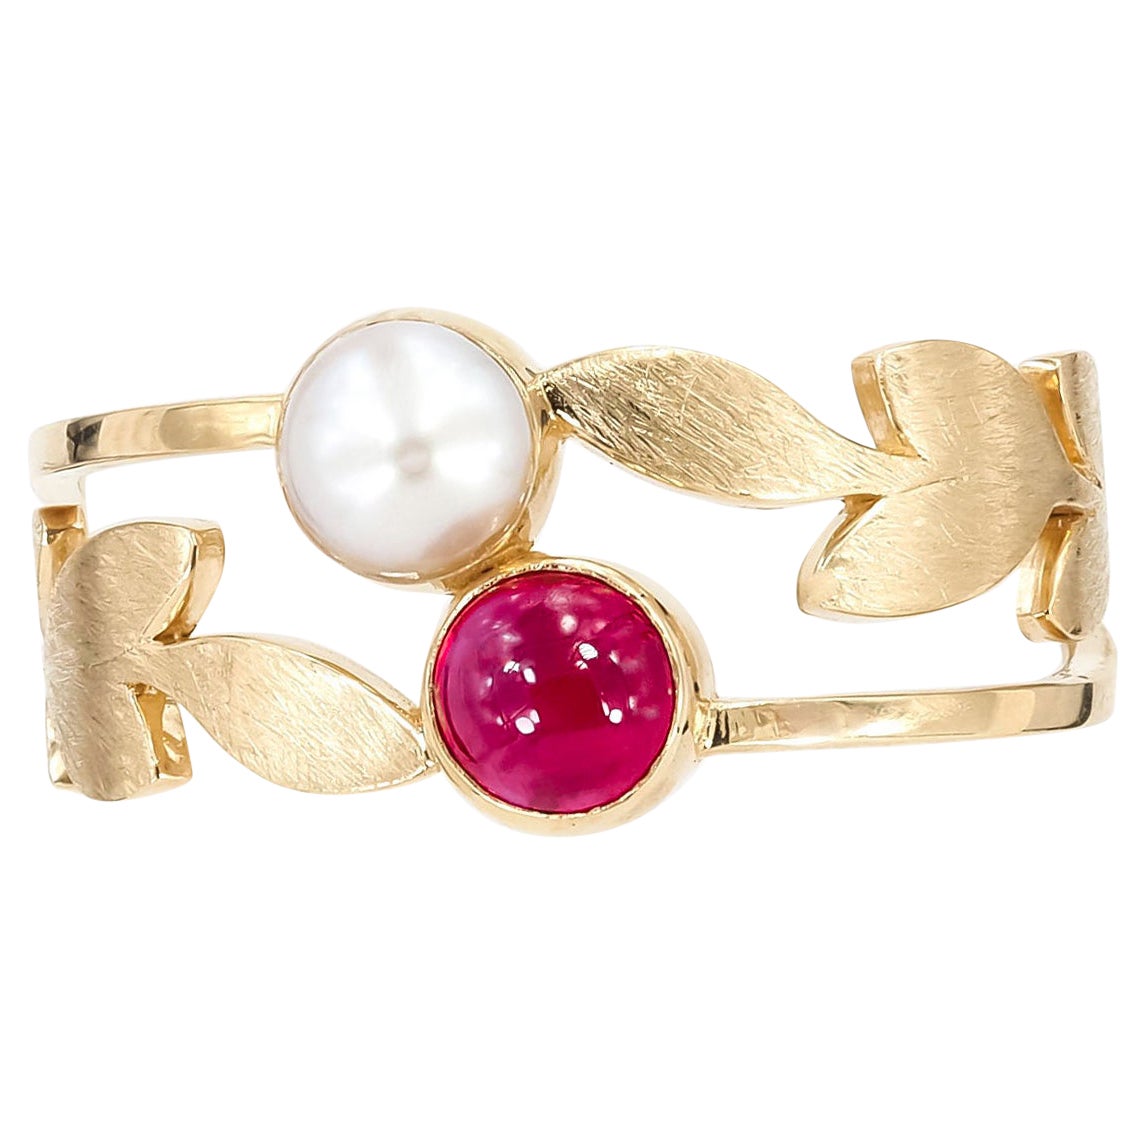 For Sale:  Toi and moi ring with ruby and pearl in 14k gold